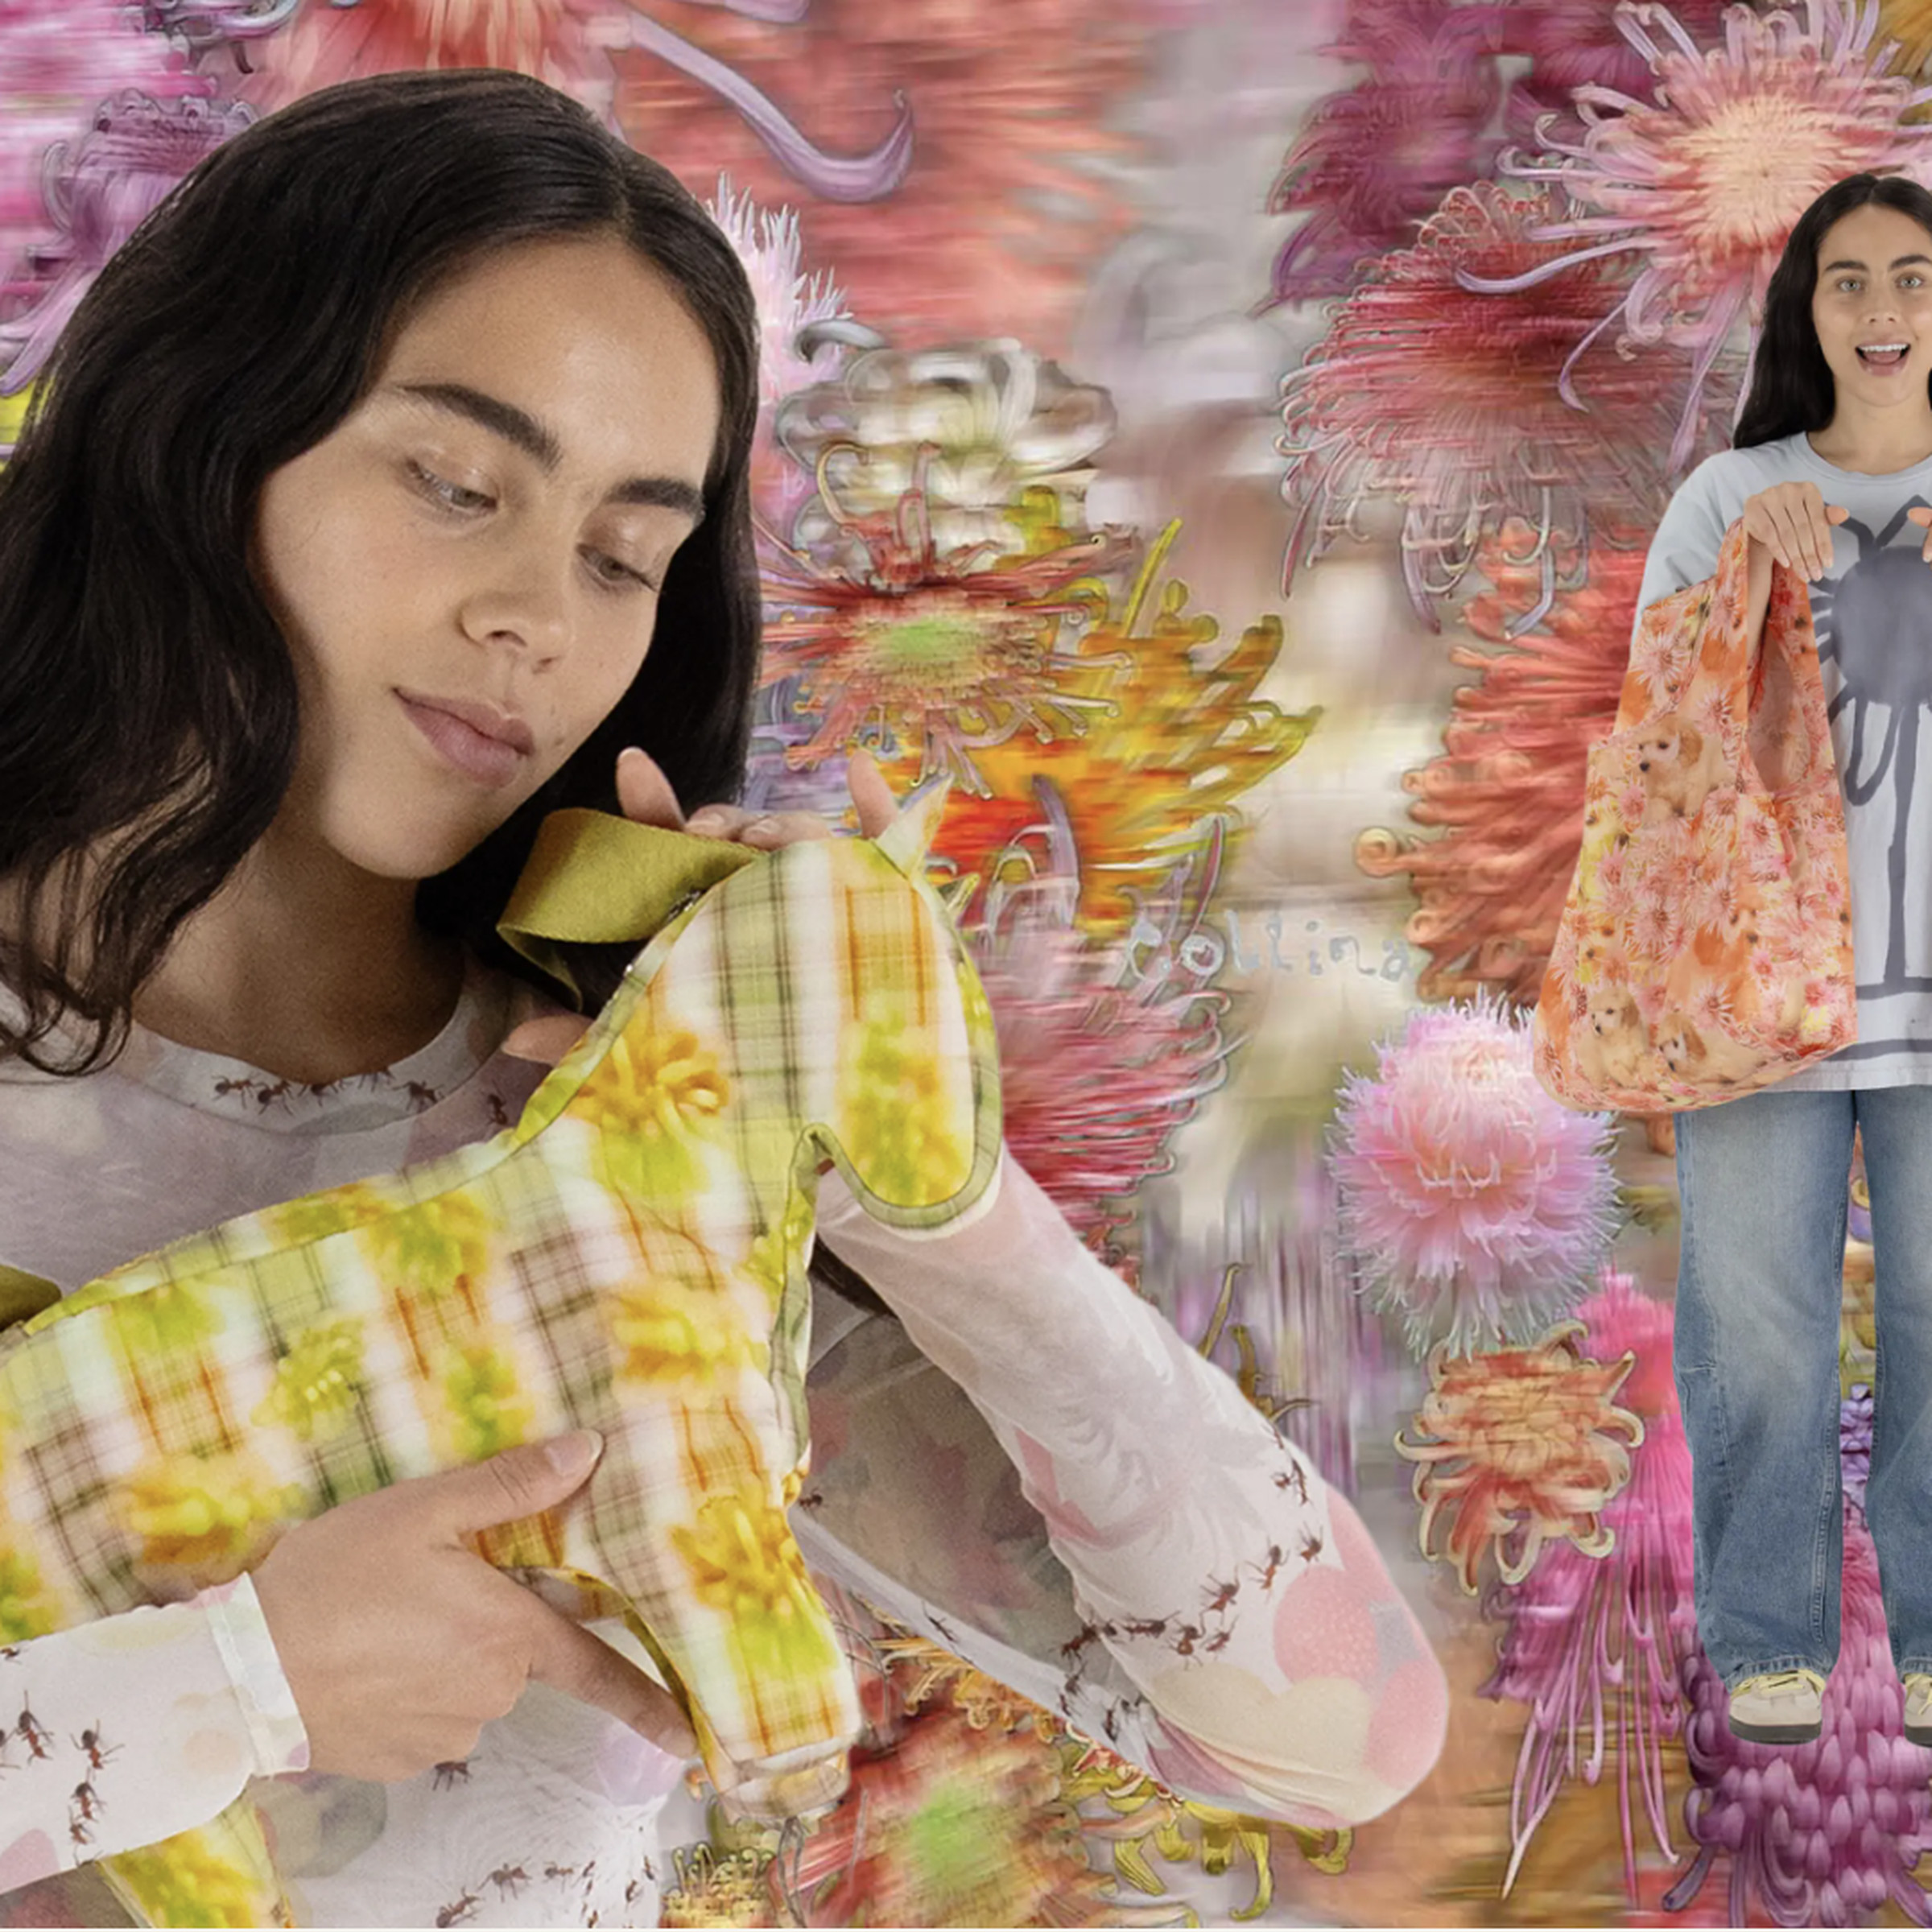 A model holding a purse shaped like a horse with a hazy, impressionistic pattern. Behind her is a similar dreamlike pattern.